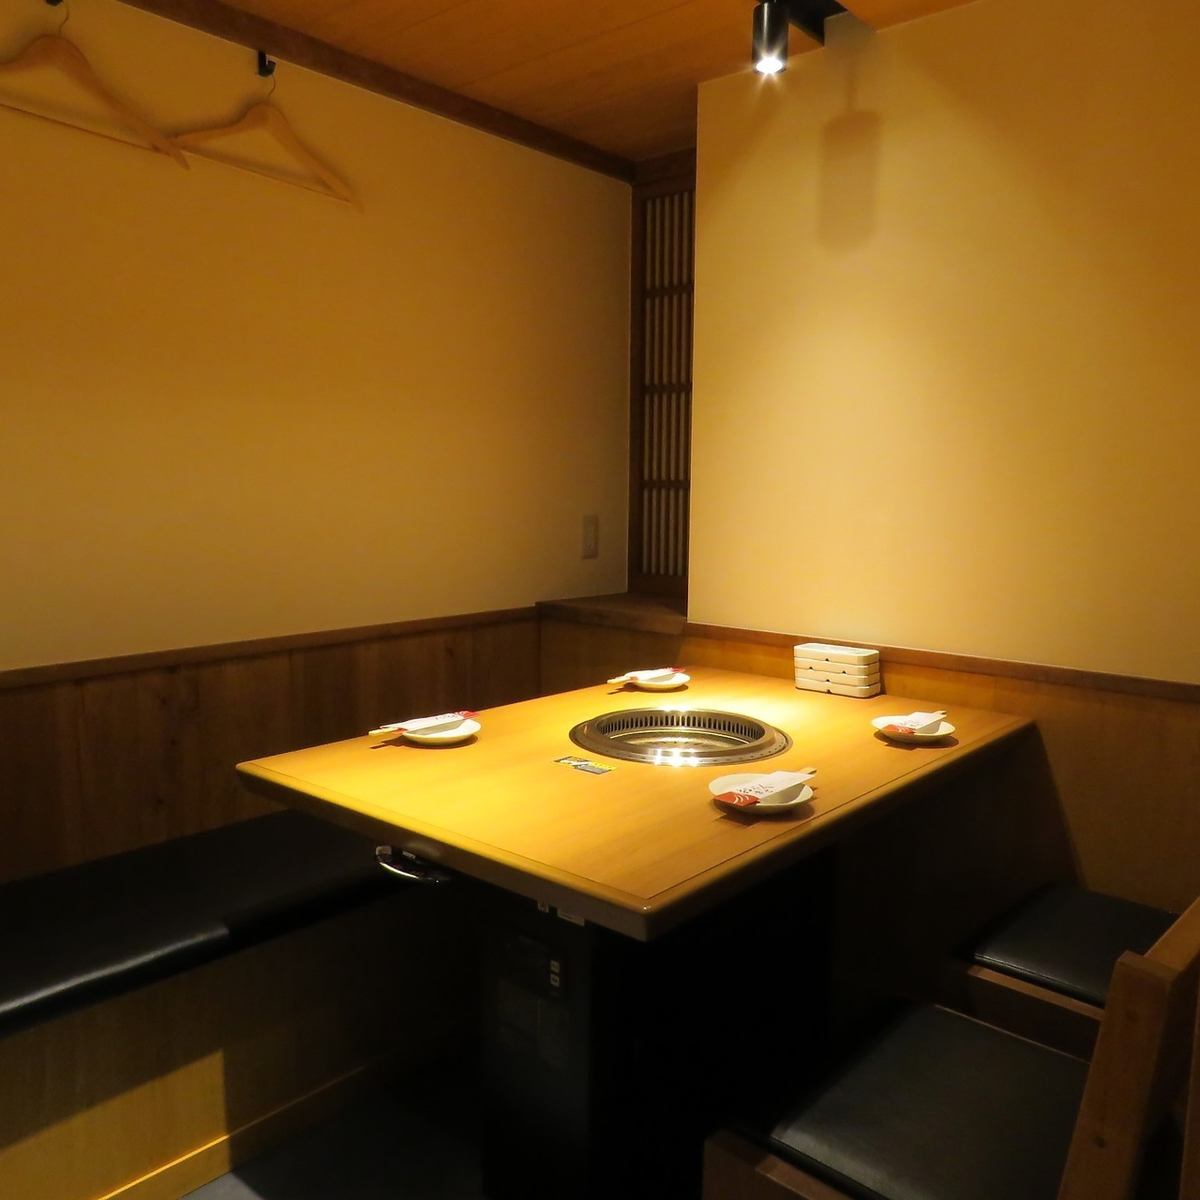 We offer a safe and secure "completely private room"! Bring happiness to your small party!